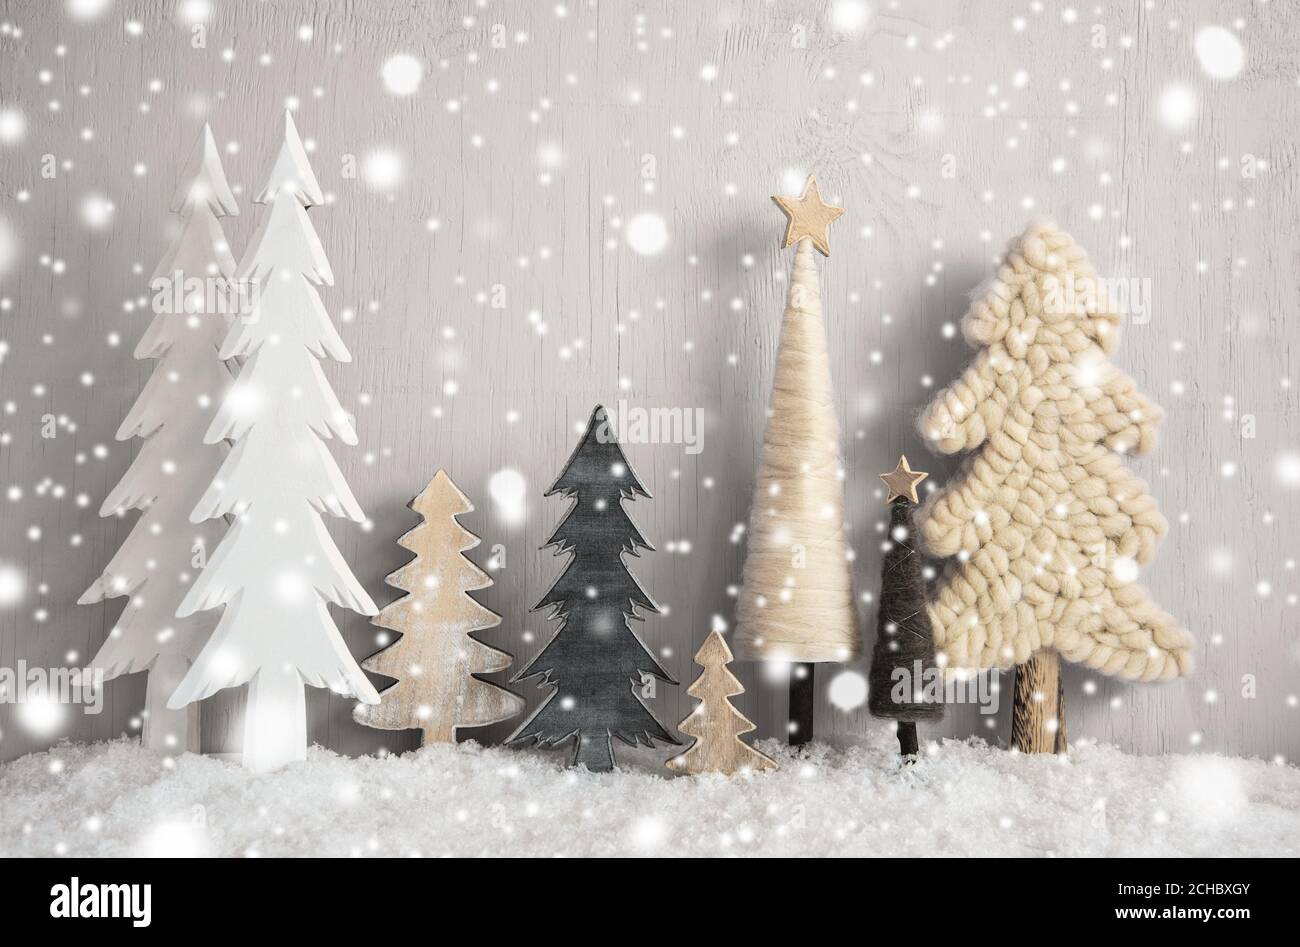 Christmas Trees, Snow, Gray Grungy Wooden Background, Star, Snwoflakes Stock Photo